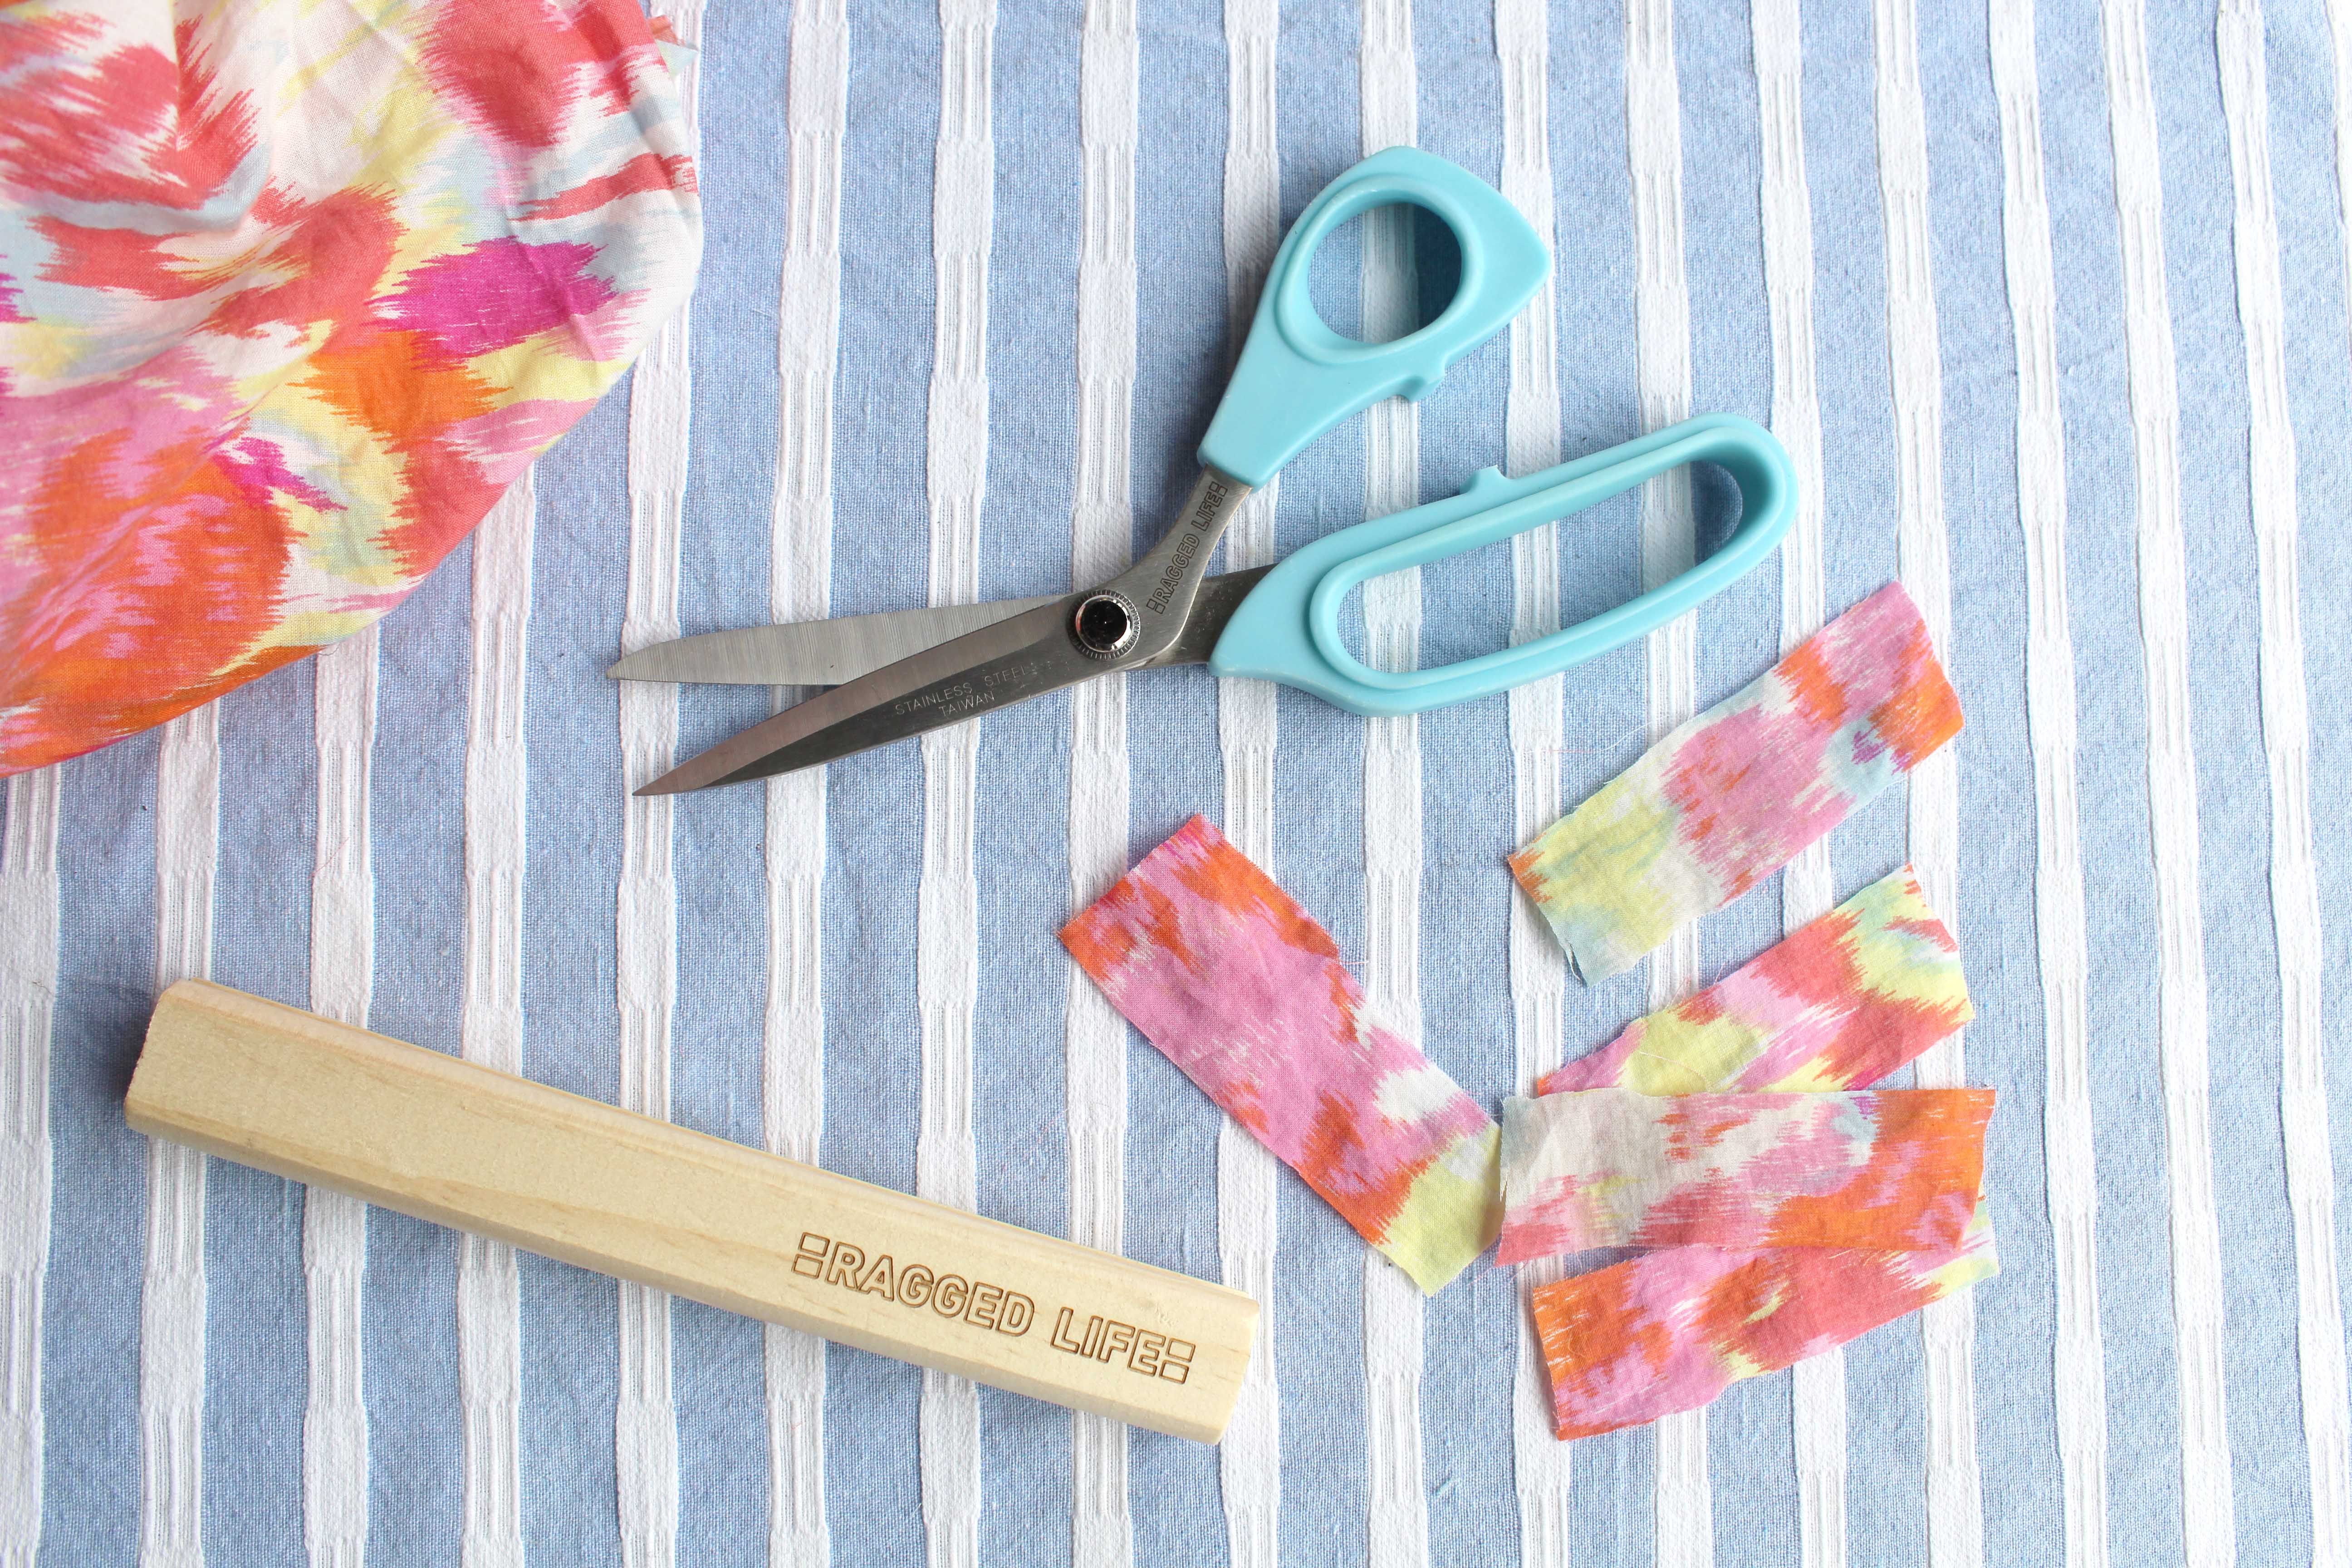 Cutting fabric for rag rugs using rag rug scissors and a wooden gauge